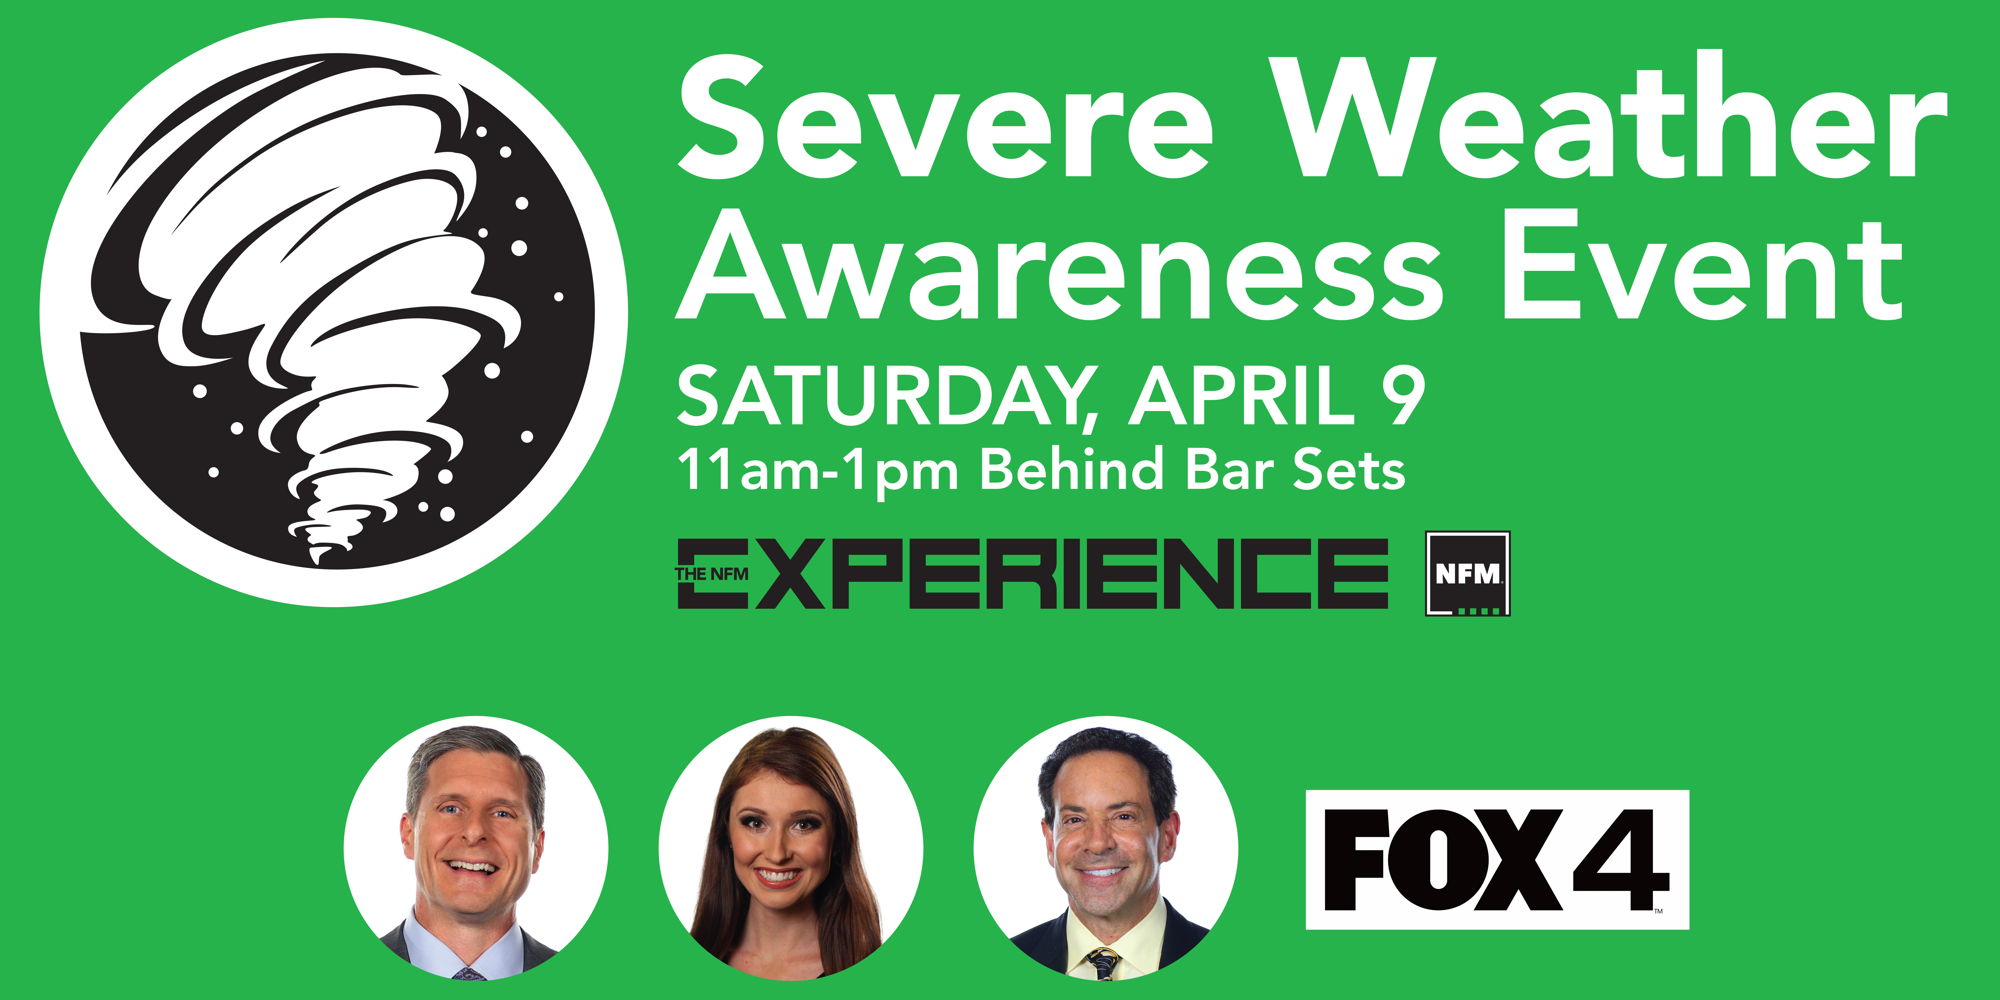 Severe Weather Awareness Event  promotional image